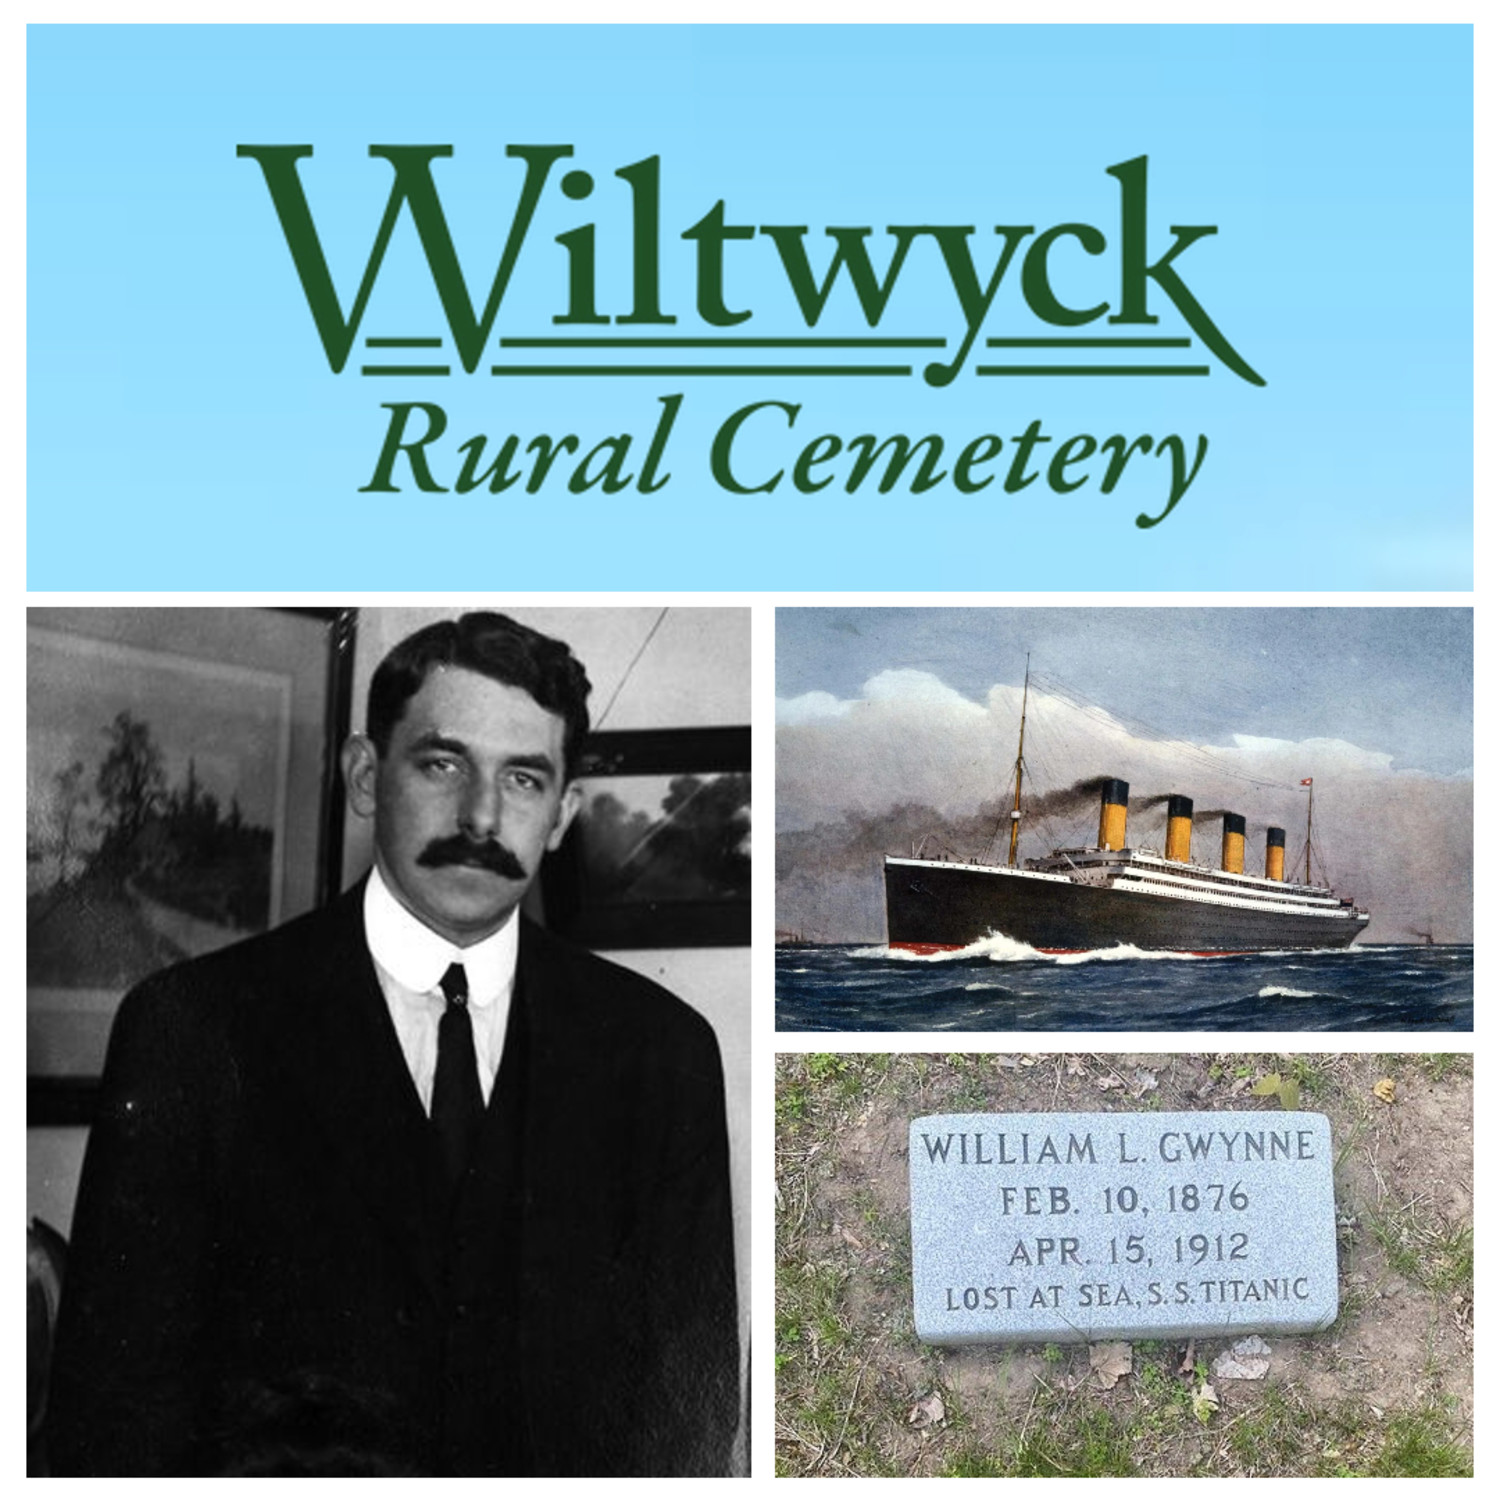 collage of photos showing the Titanic, William Gwynne and his gravestone